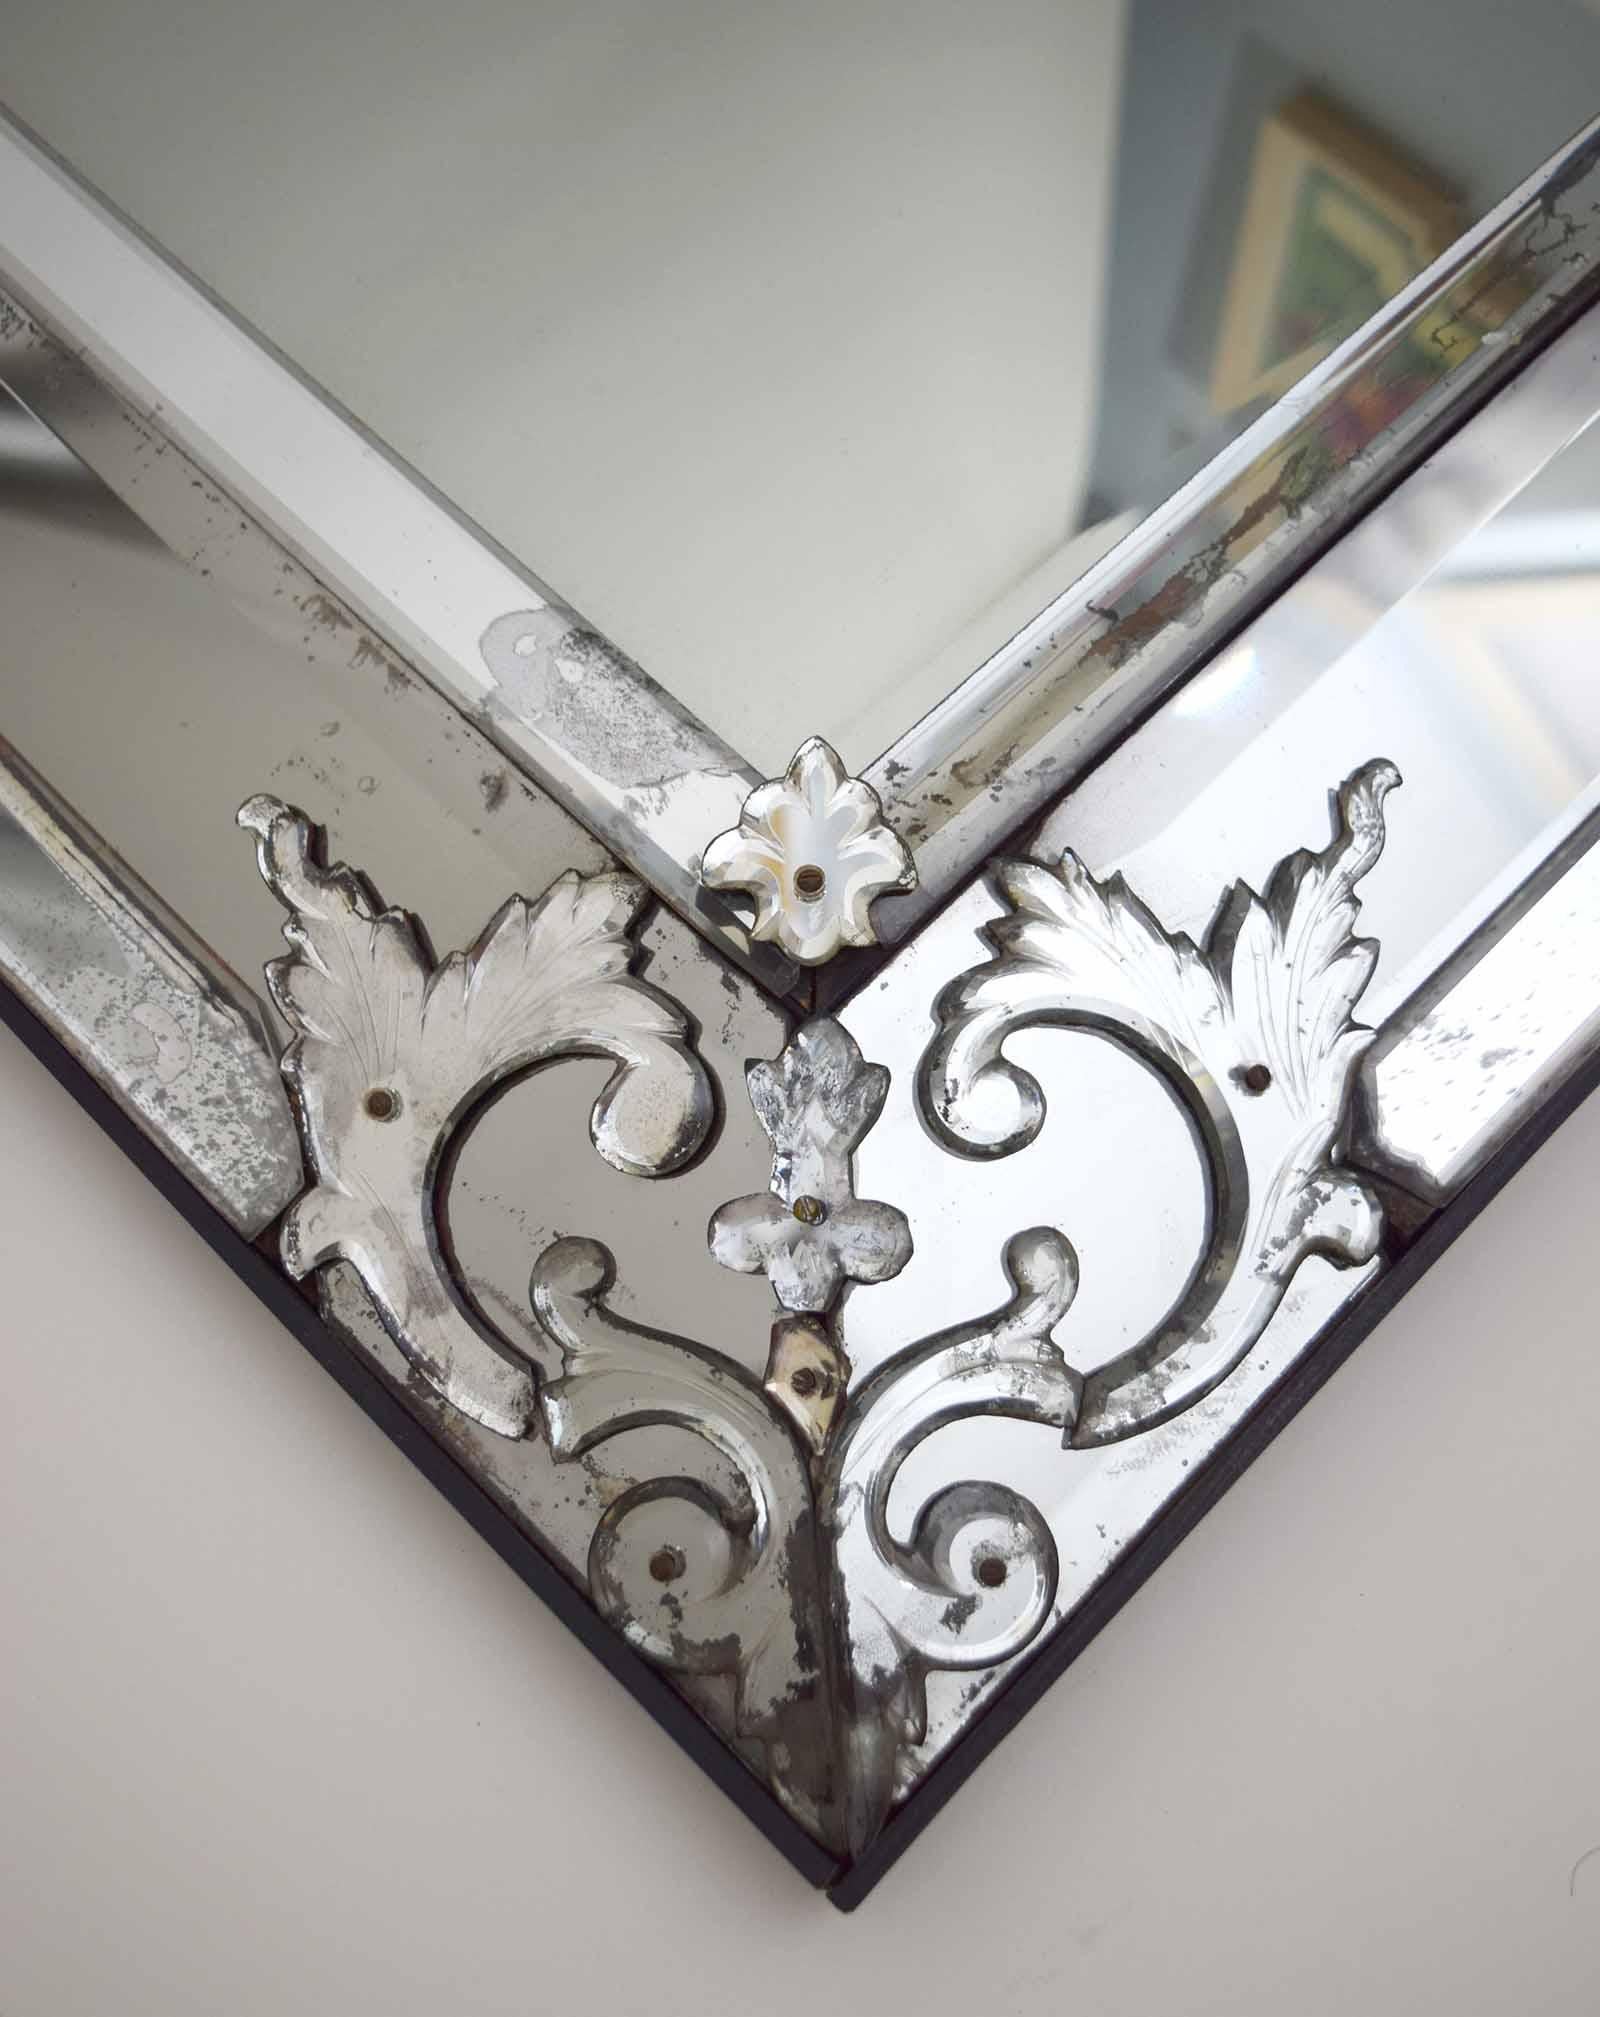 This mercury-glass mirror was made in 19th century Italy, and has a greyish tinge that endows it with mystery. Stylistically, it harks back to 17th century mirror-framed mirrors, which became fashionable once again in the 1930s. Then they were